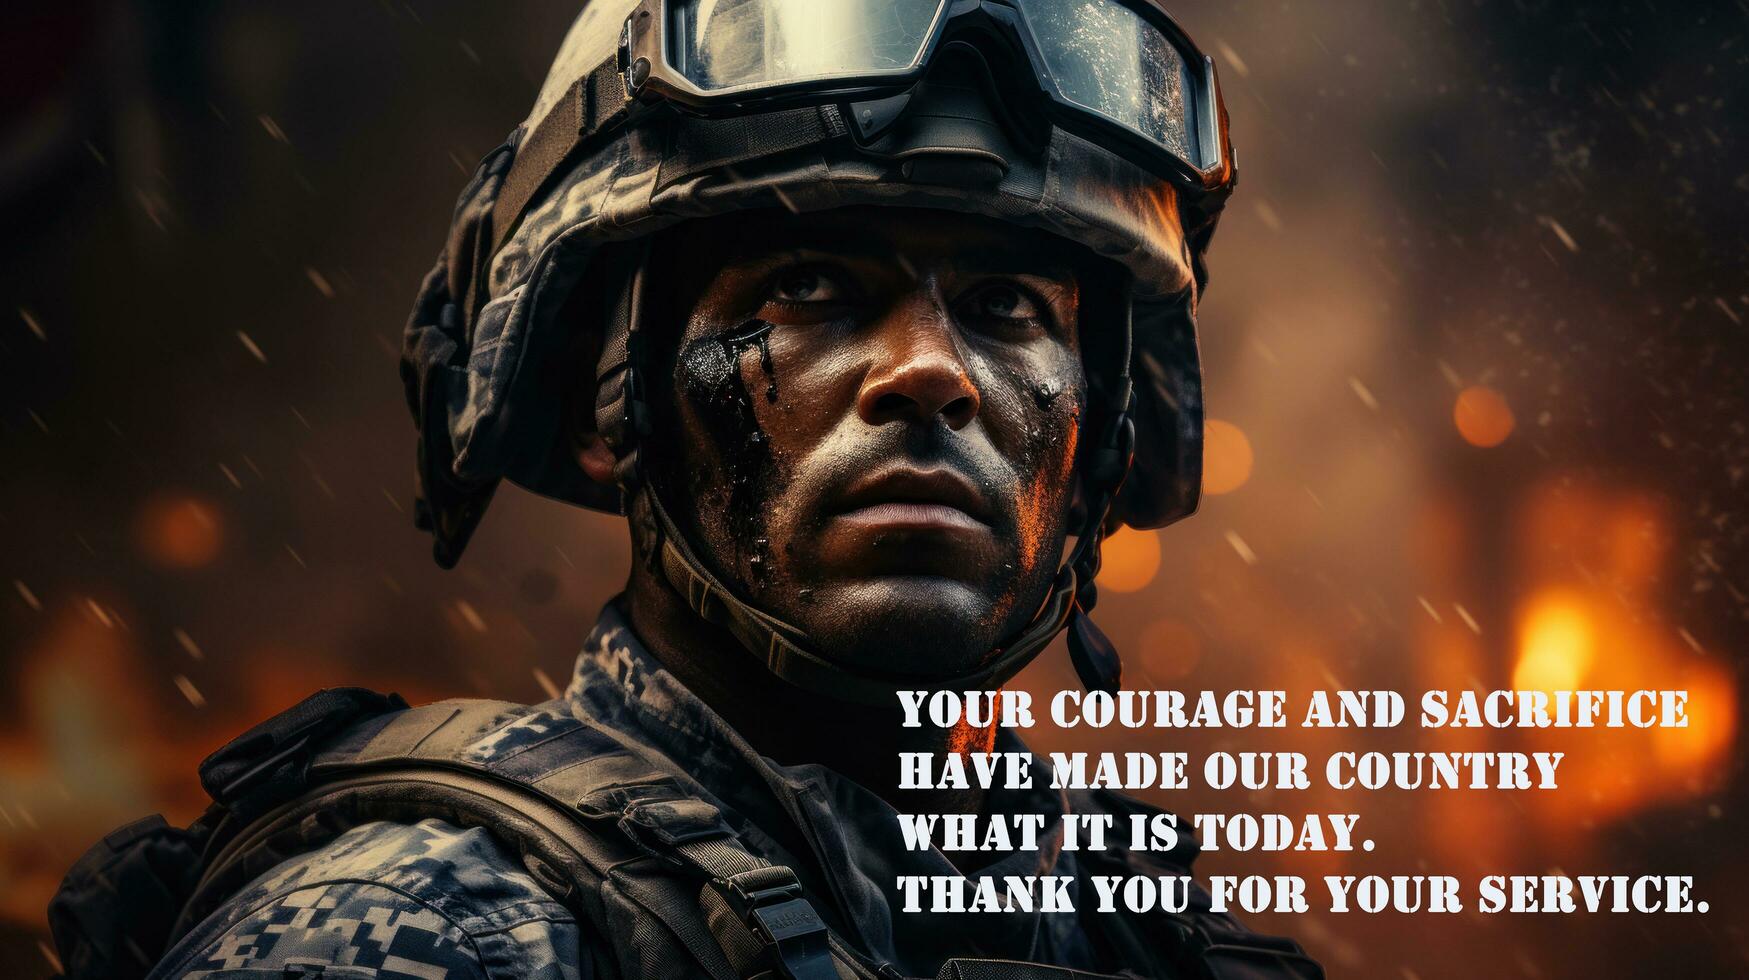 Your courage and sacrifice have made our country what it is today. Thank you for your service. photo